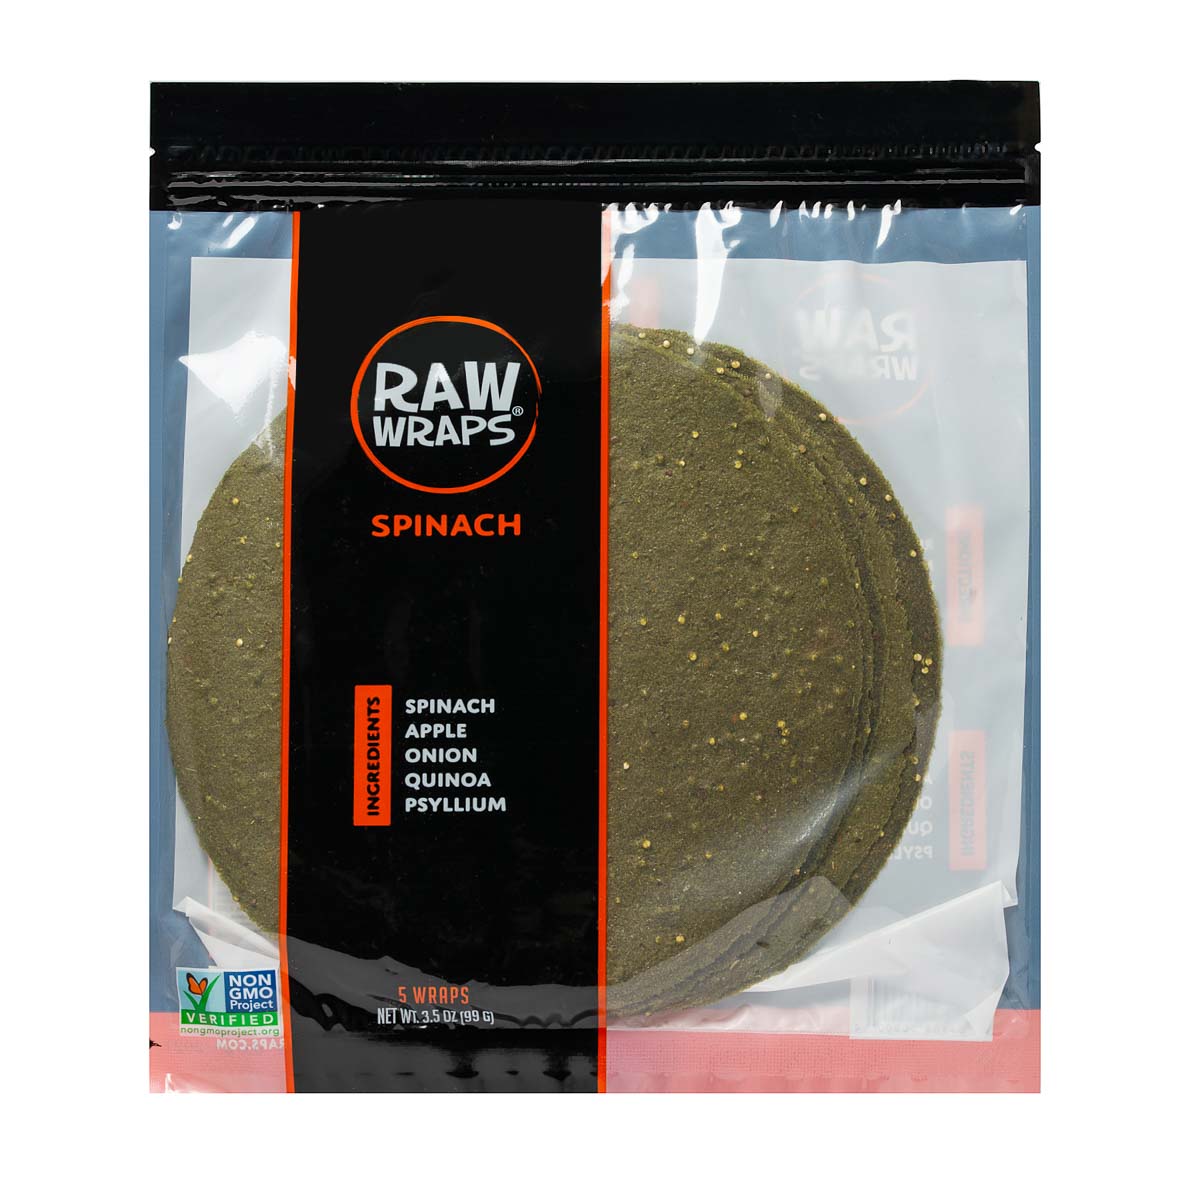 Raw Wrap Spinach | Greenleaf Foods | Raw Living UK | Raw Foods | Greenleaf Raw Spinach Wraps are made out of Veggies and Fruit; Fresh Spinach is combined with Apples and Quinoa to create a Soft and Pliable Raw, Vegan Wrap.